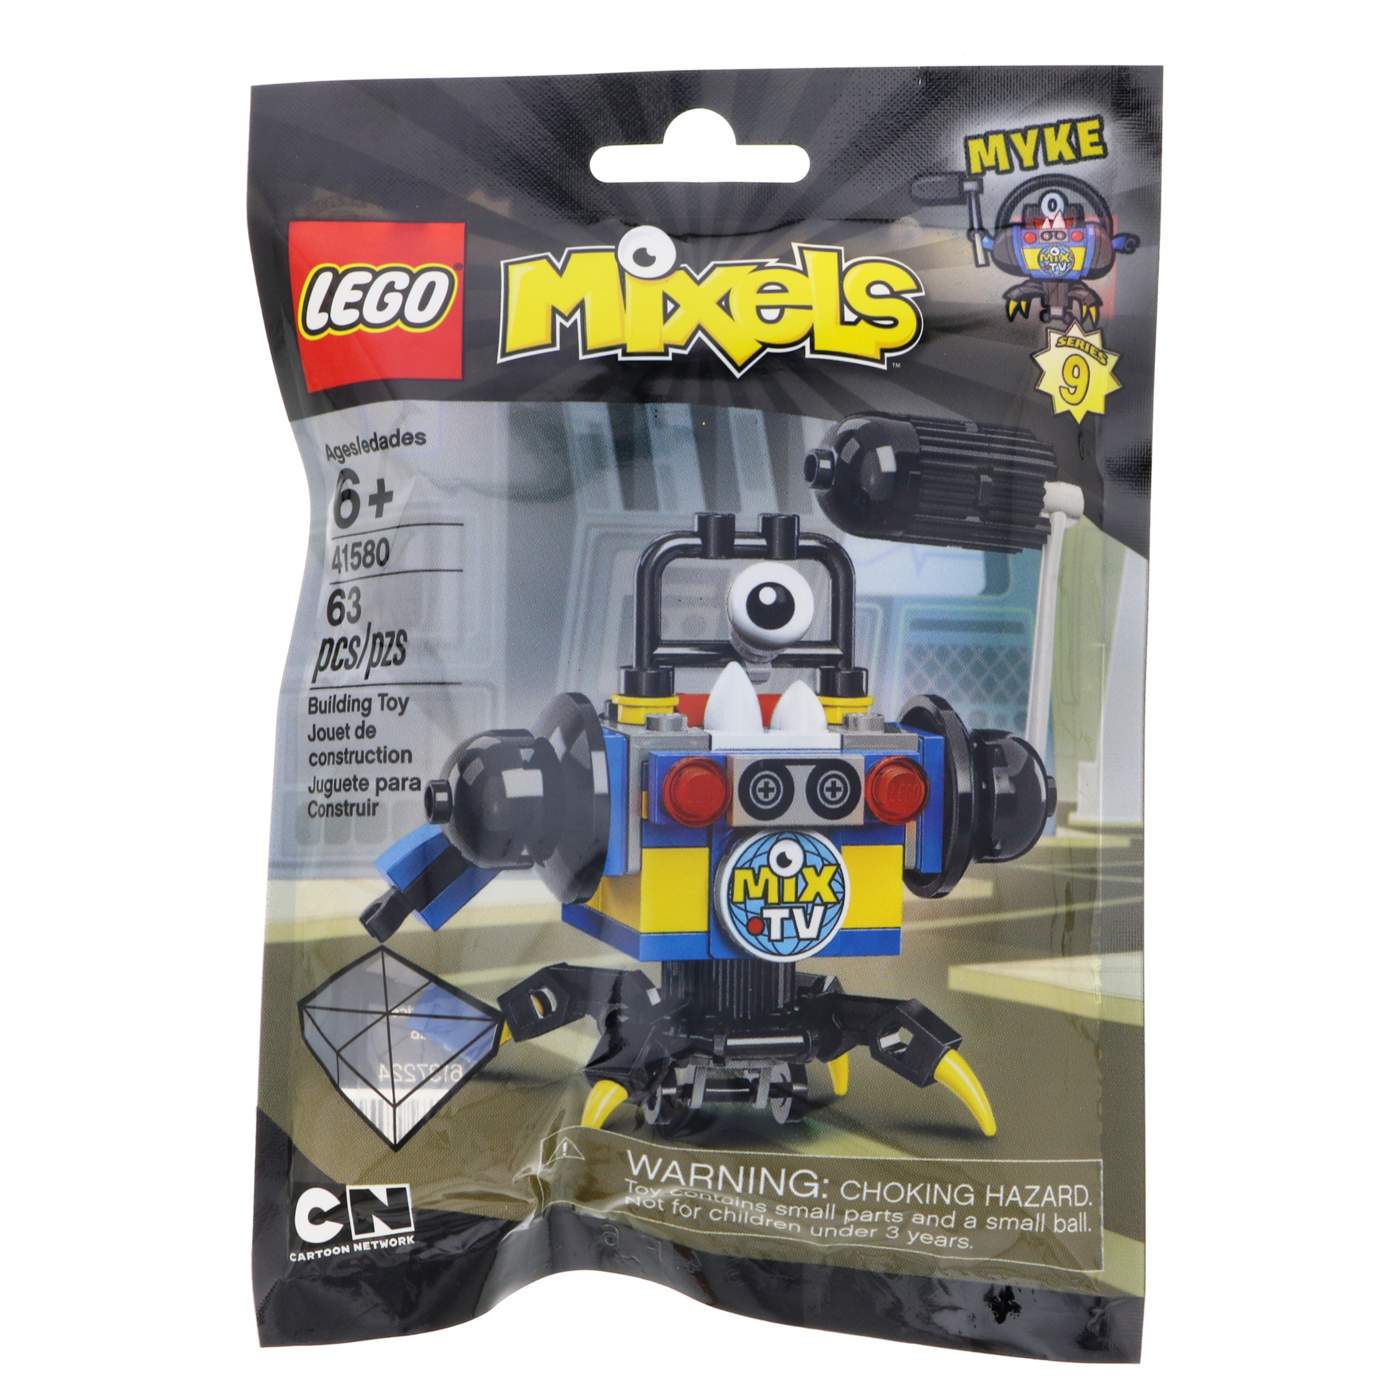 LEGO Mixels Assorted Series 9 Figures, Characters May Vary; image 5 of 9